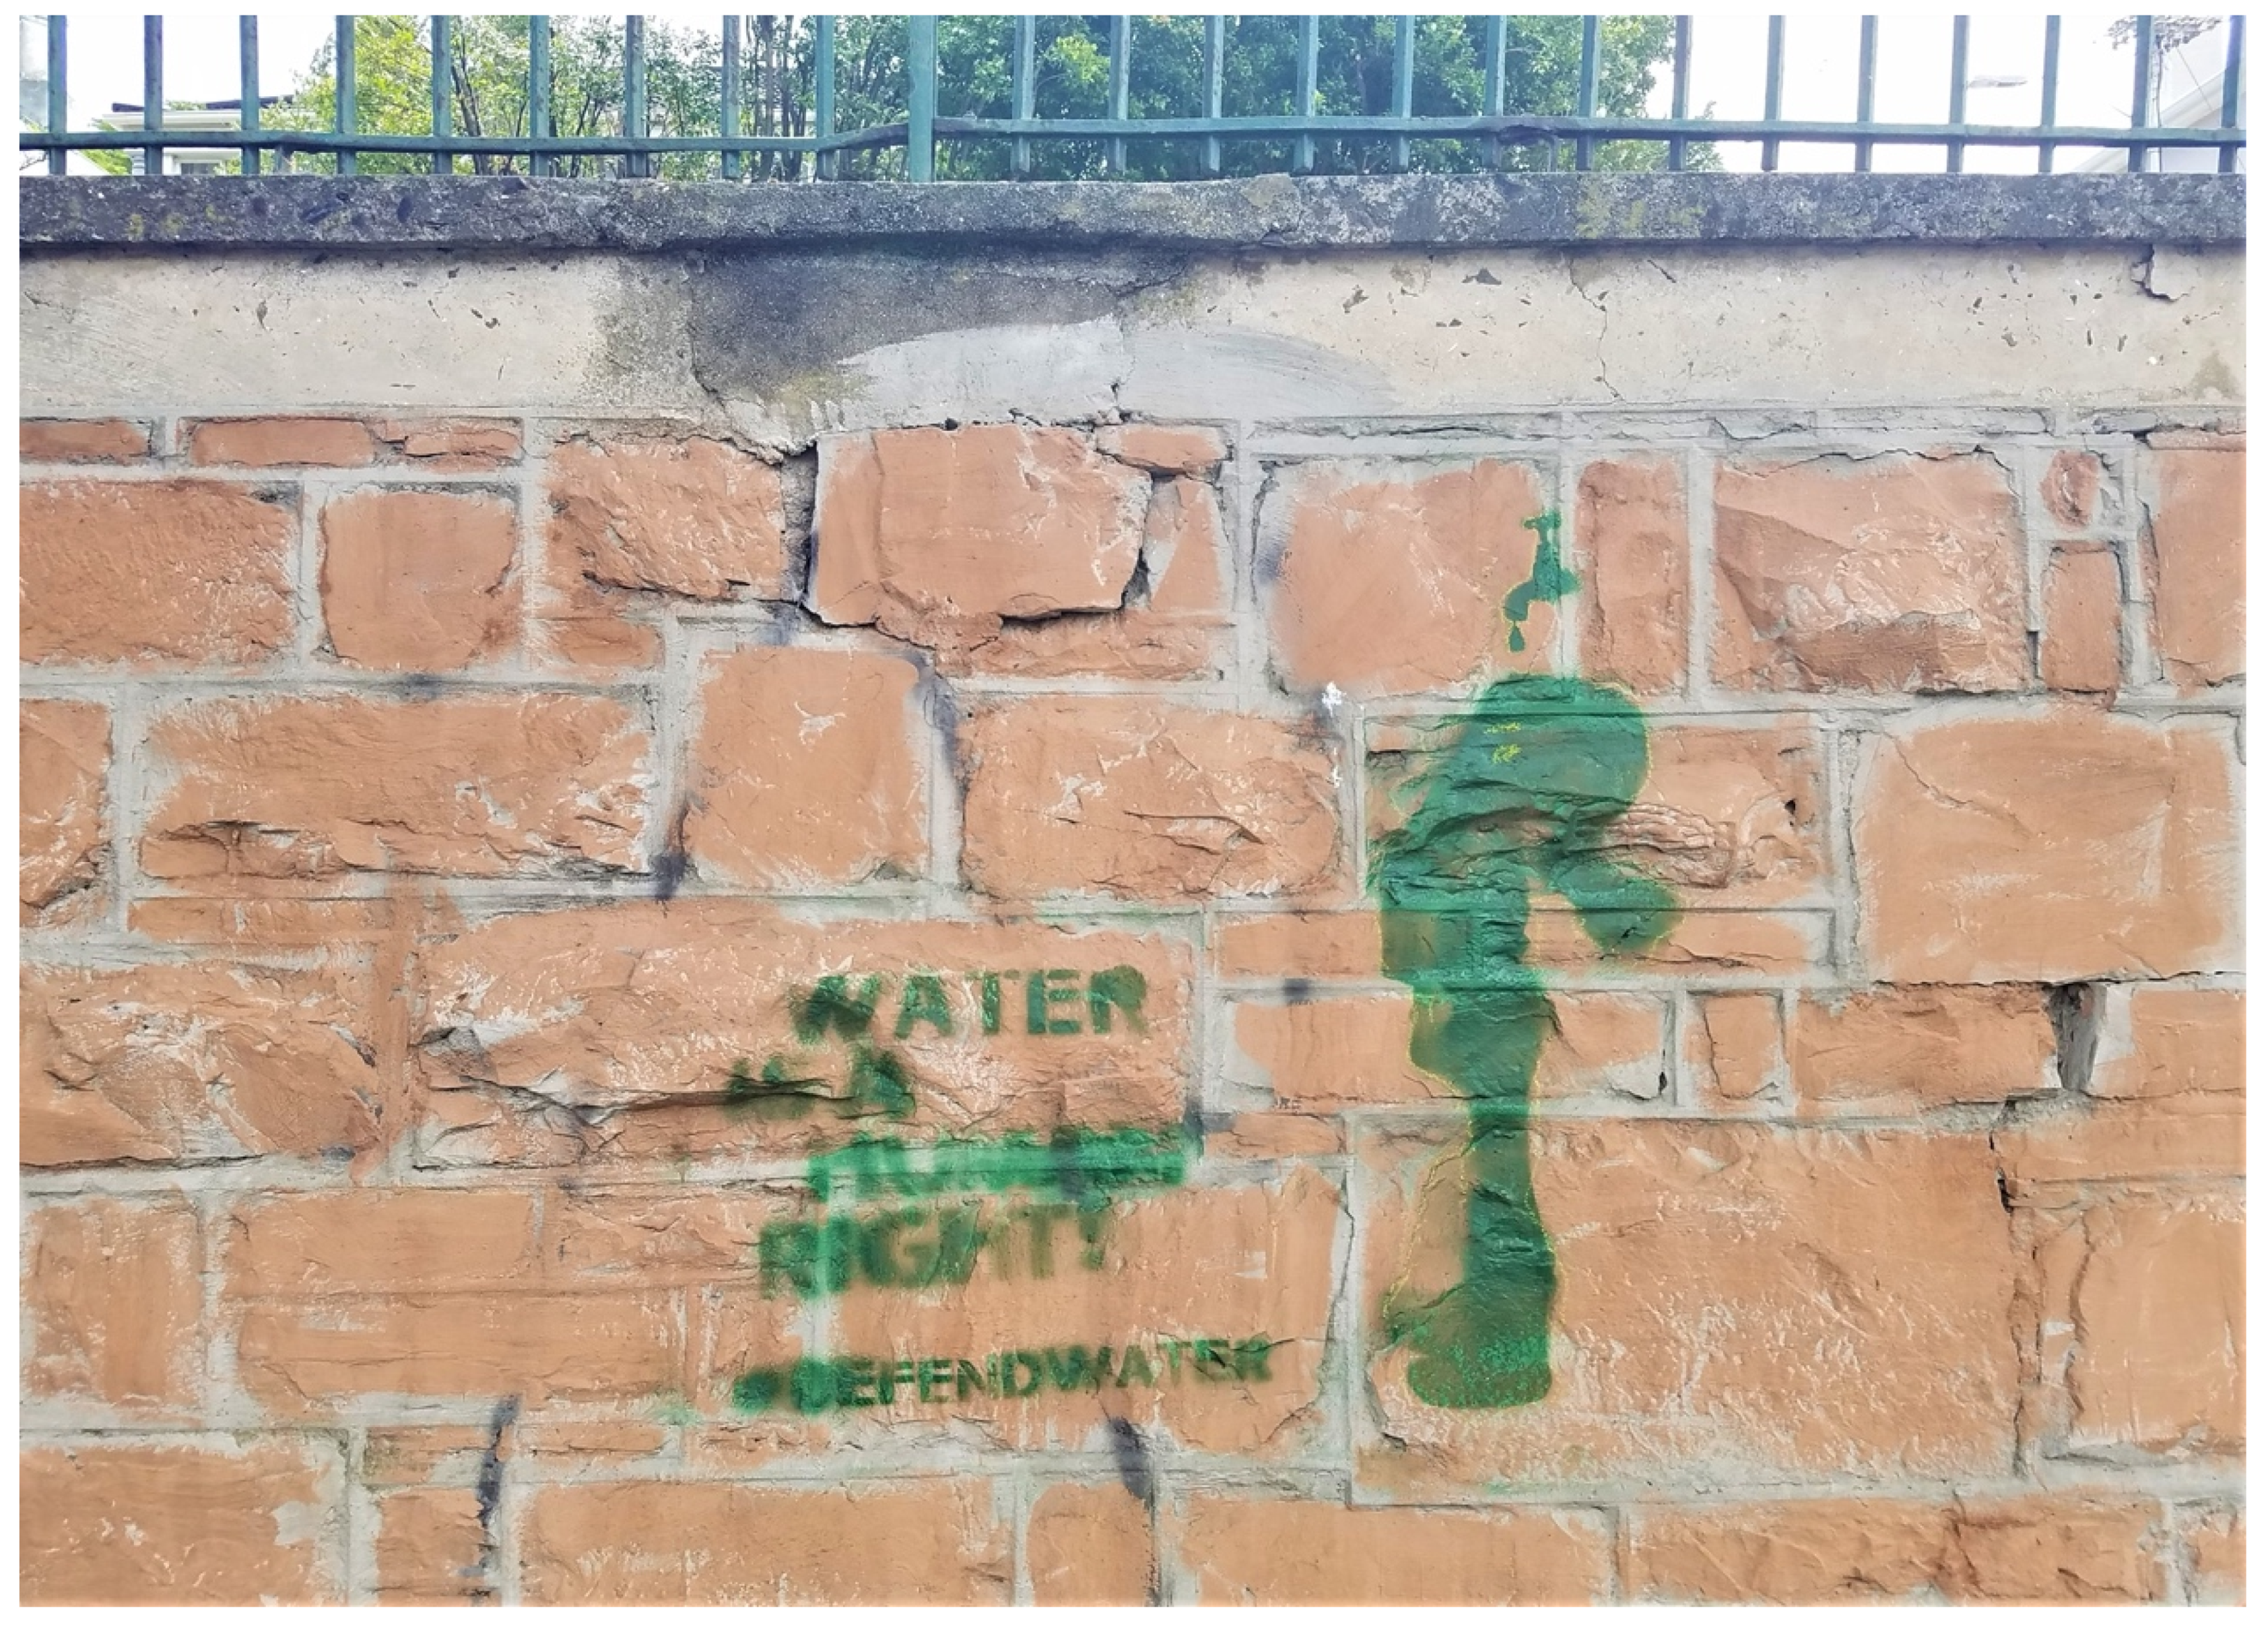 Water | Free Full-Text | Water Rights in a Time of Fragility: An  Exploration of Contestation and Discourse around Cape Town's “Day Zero”  Water Crisis